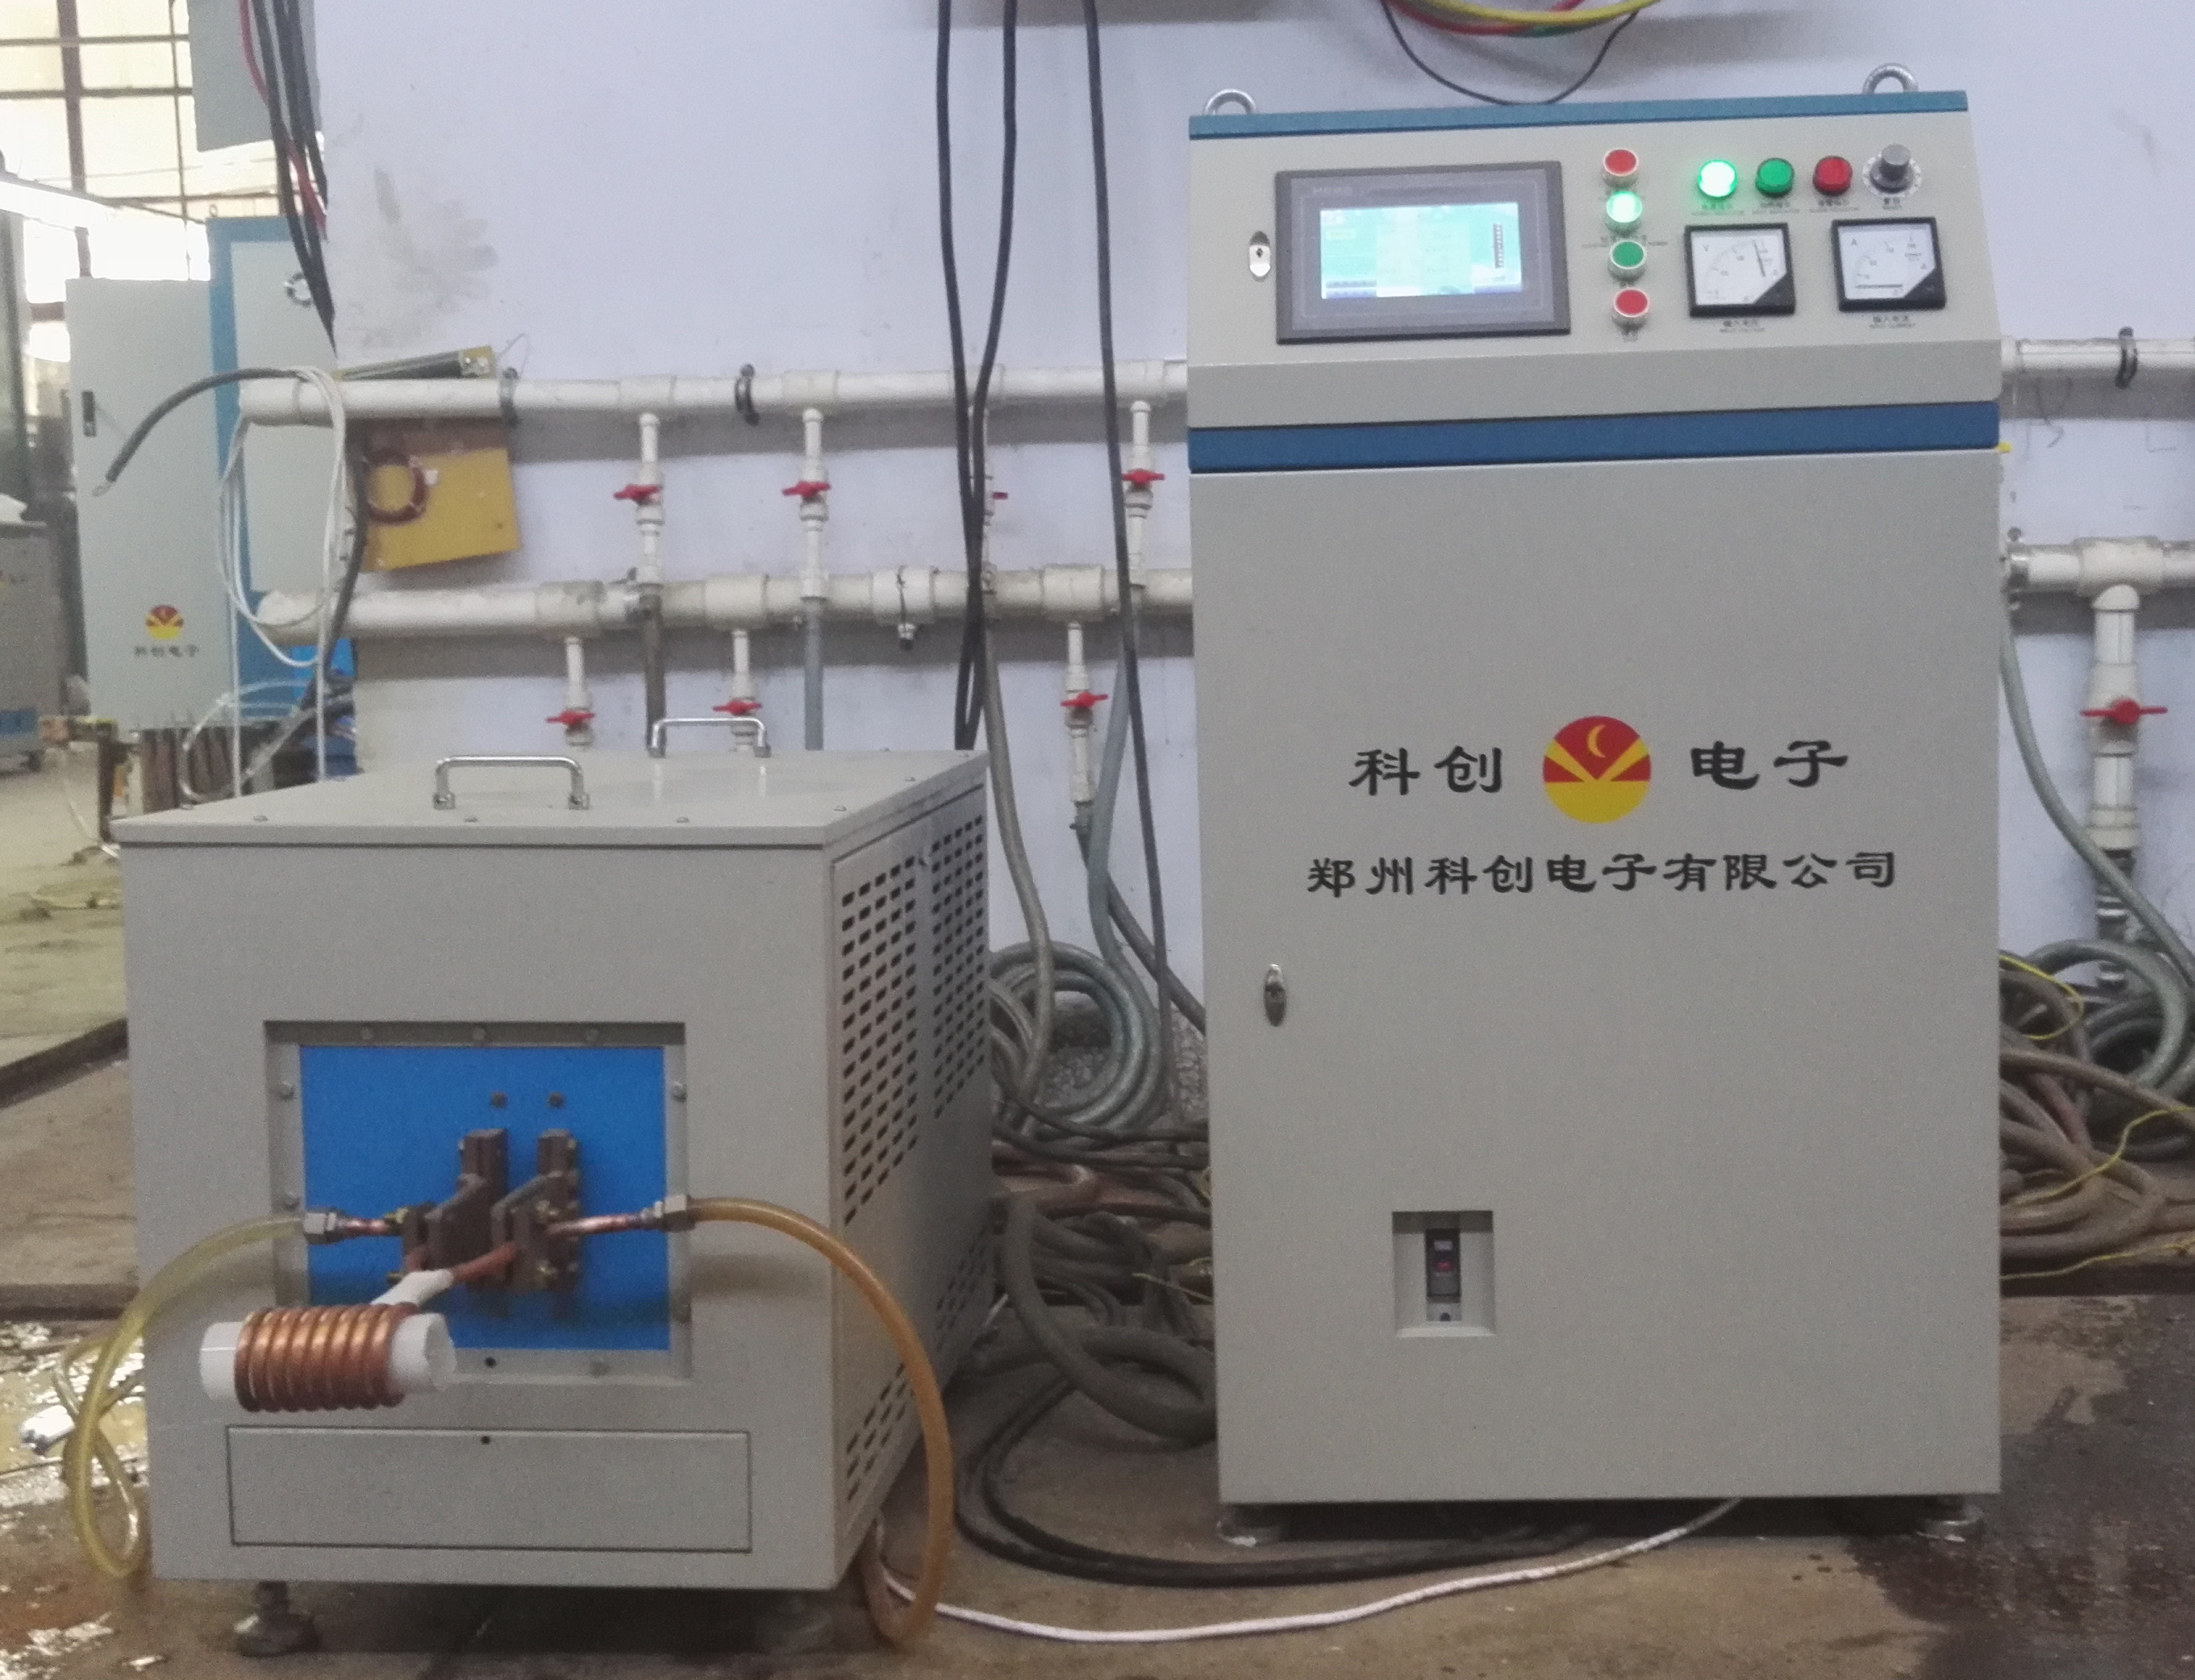 Full Air-cooled Induction Heating Machine